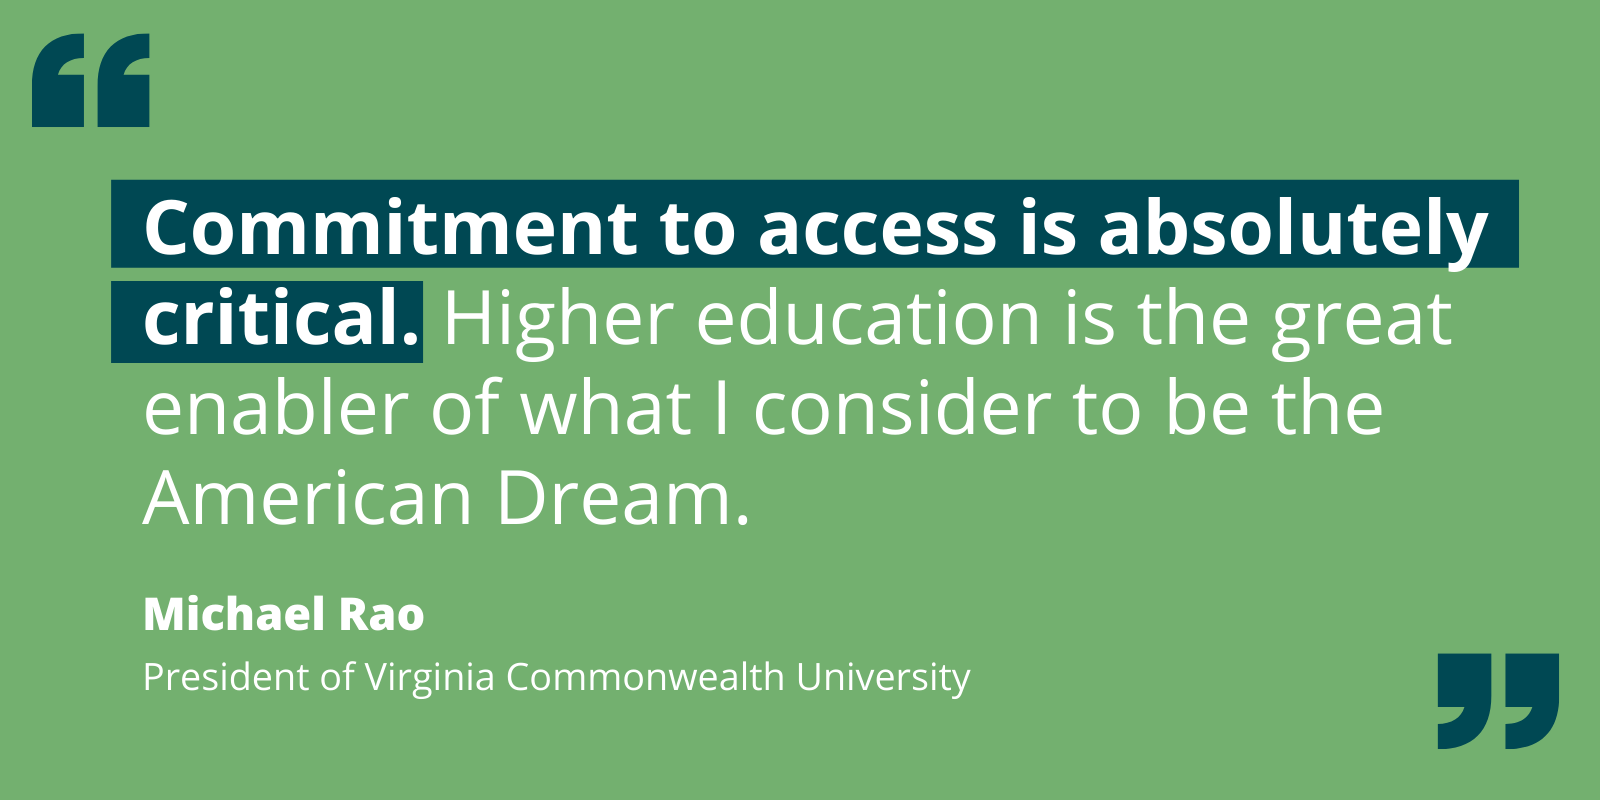 Quote by Michael Rao re: how access to higher ed is critical as the great enabler of the American Dream.